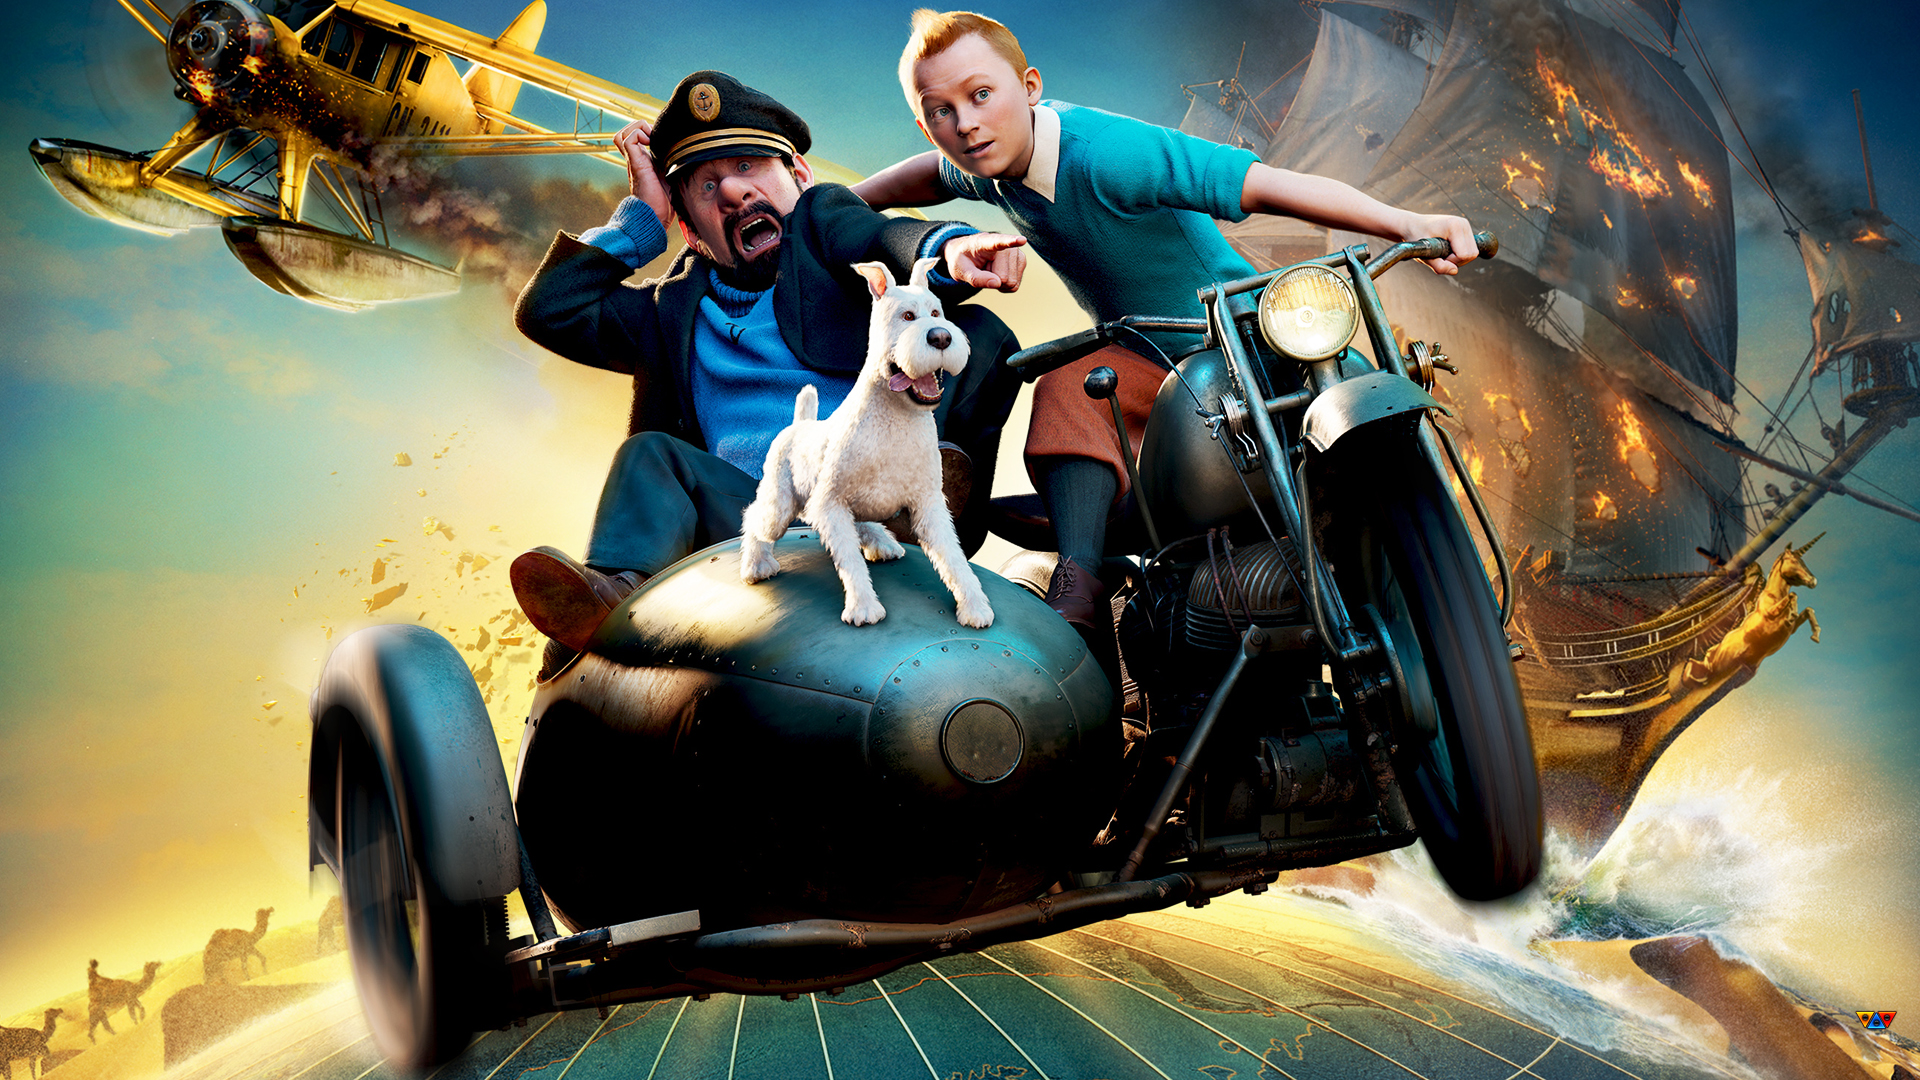 Tintin And Friends Exclusive HD Wallpaper